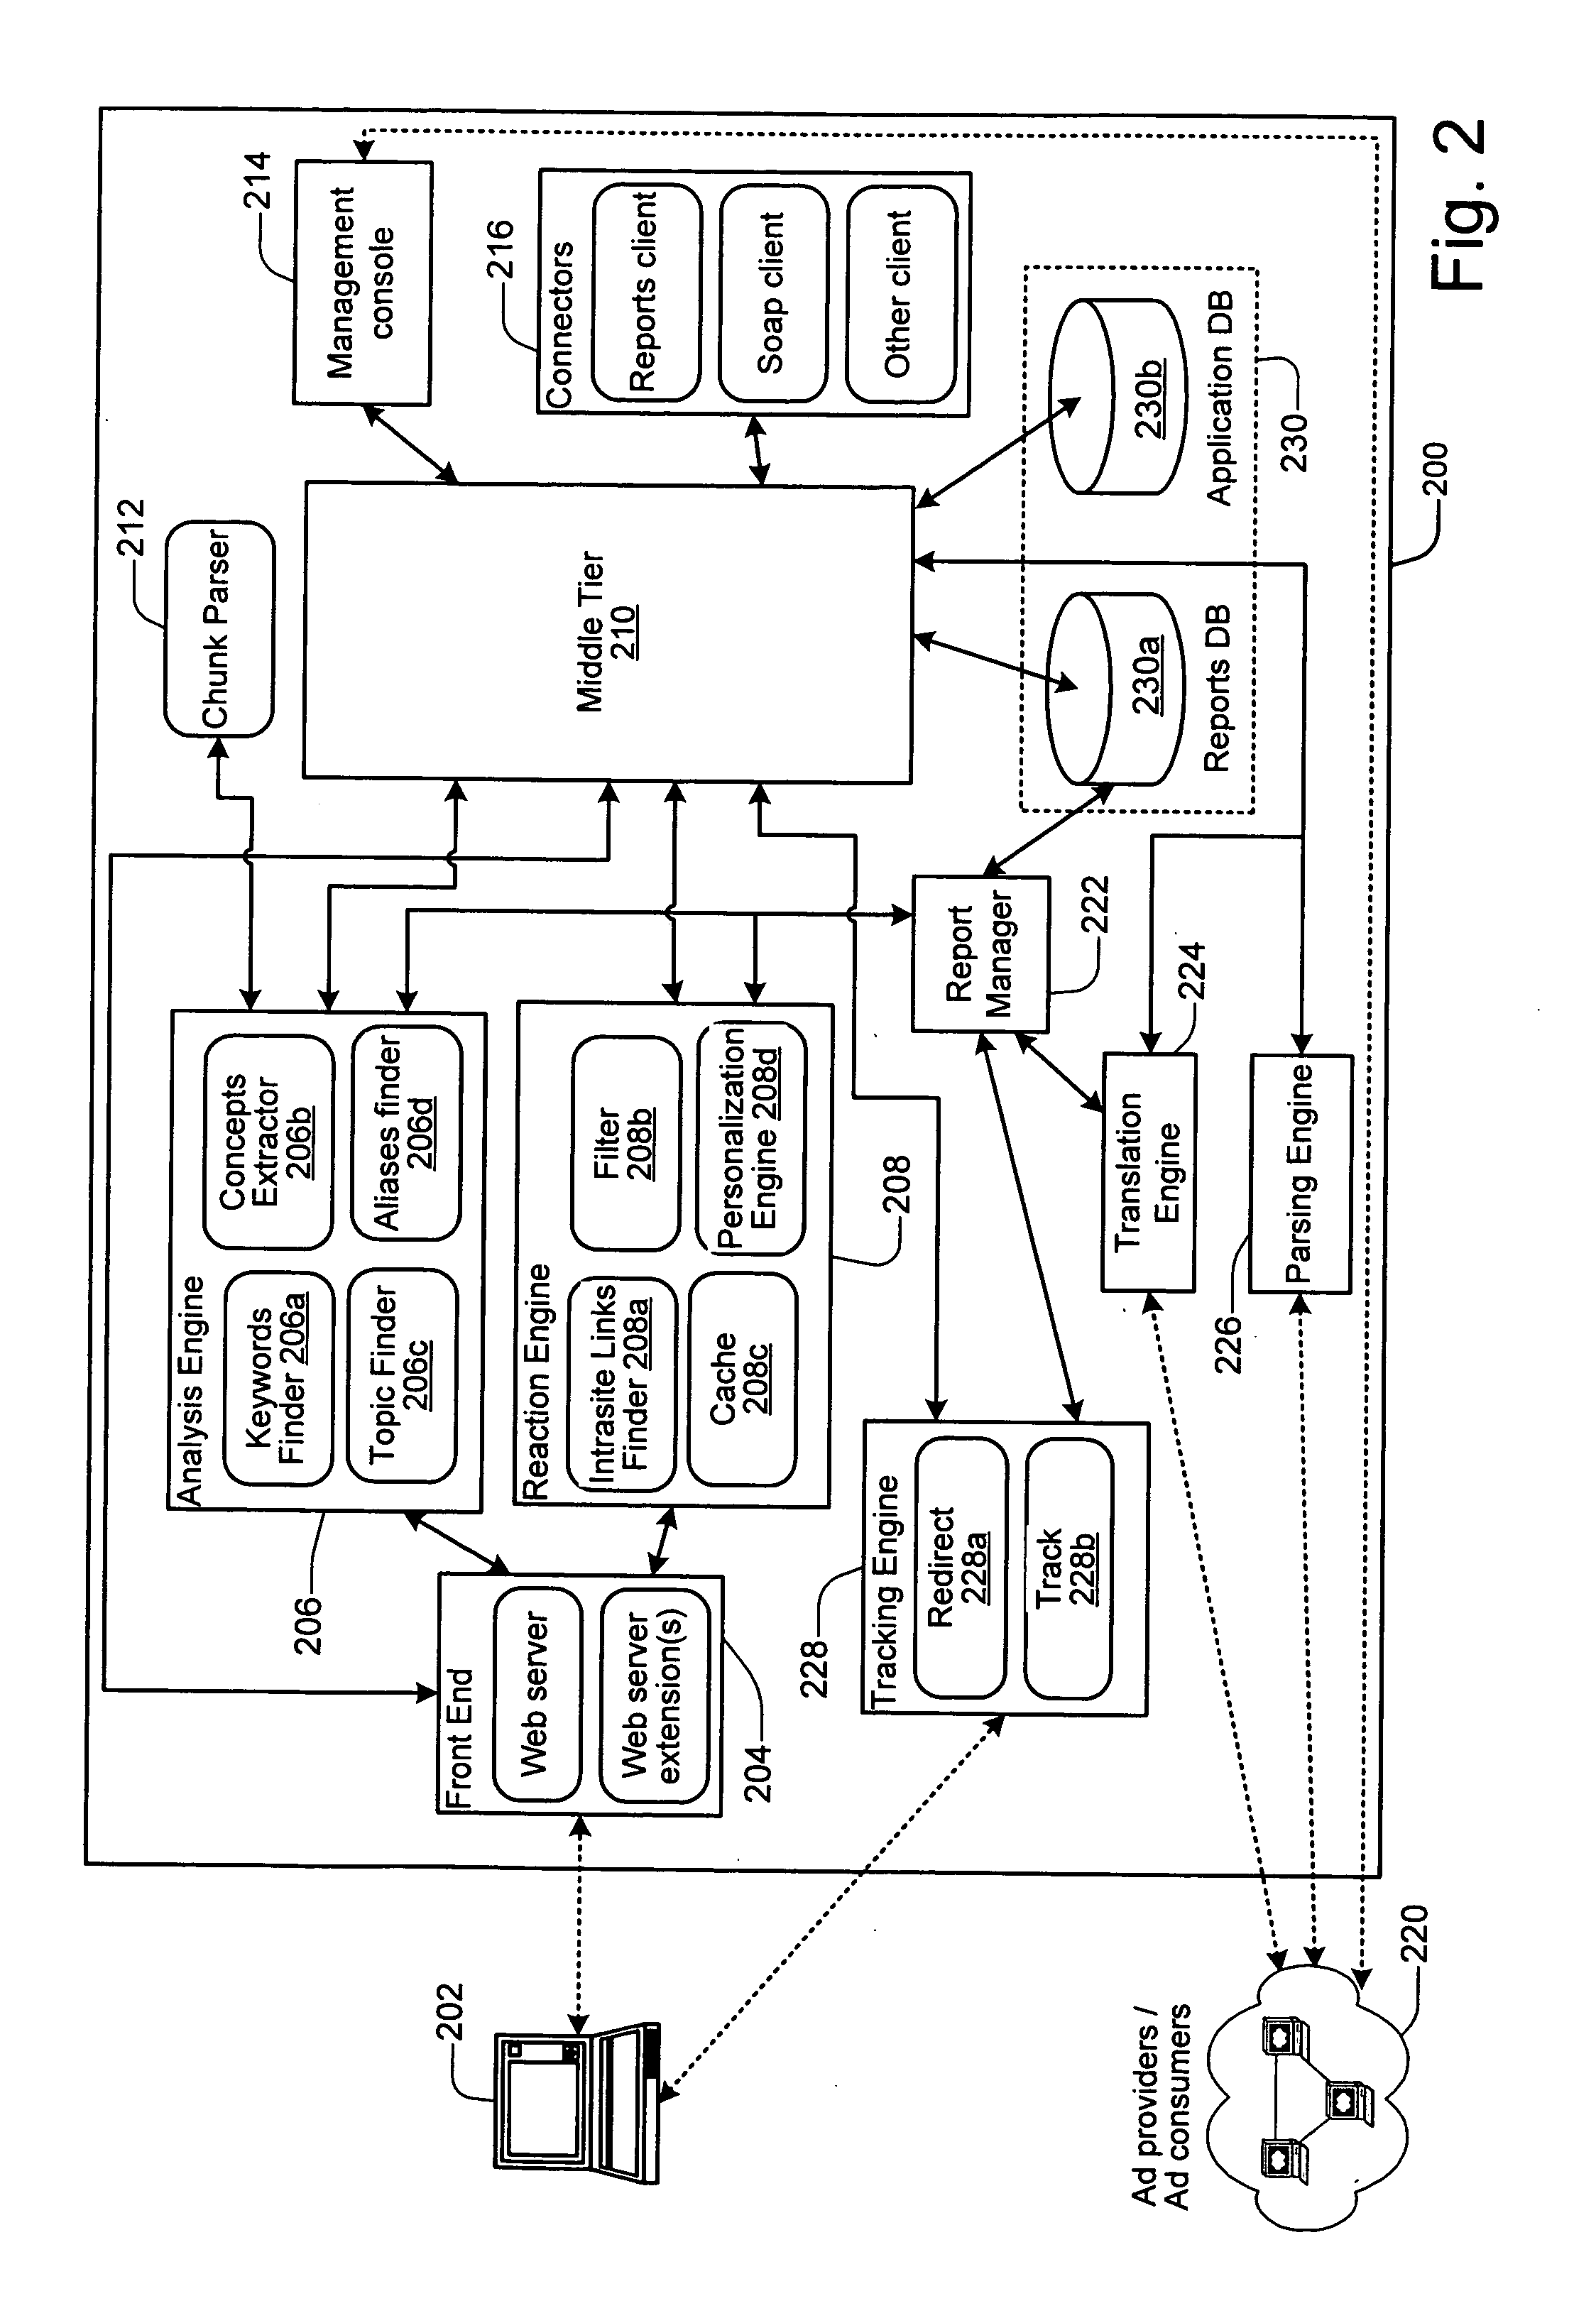 System and method for real-time web page context analysis for the real-time insertion of textual markup objects and dynamic content